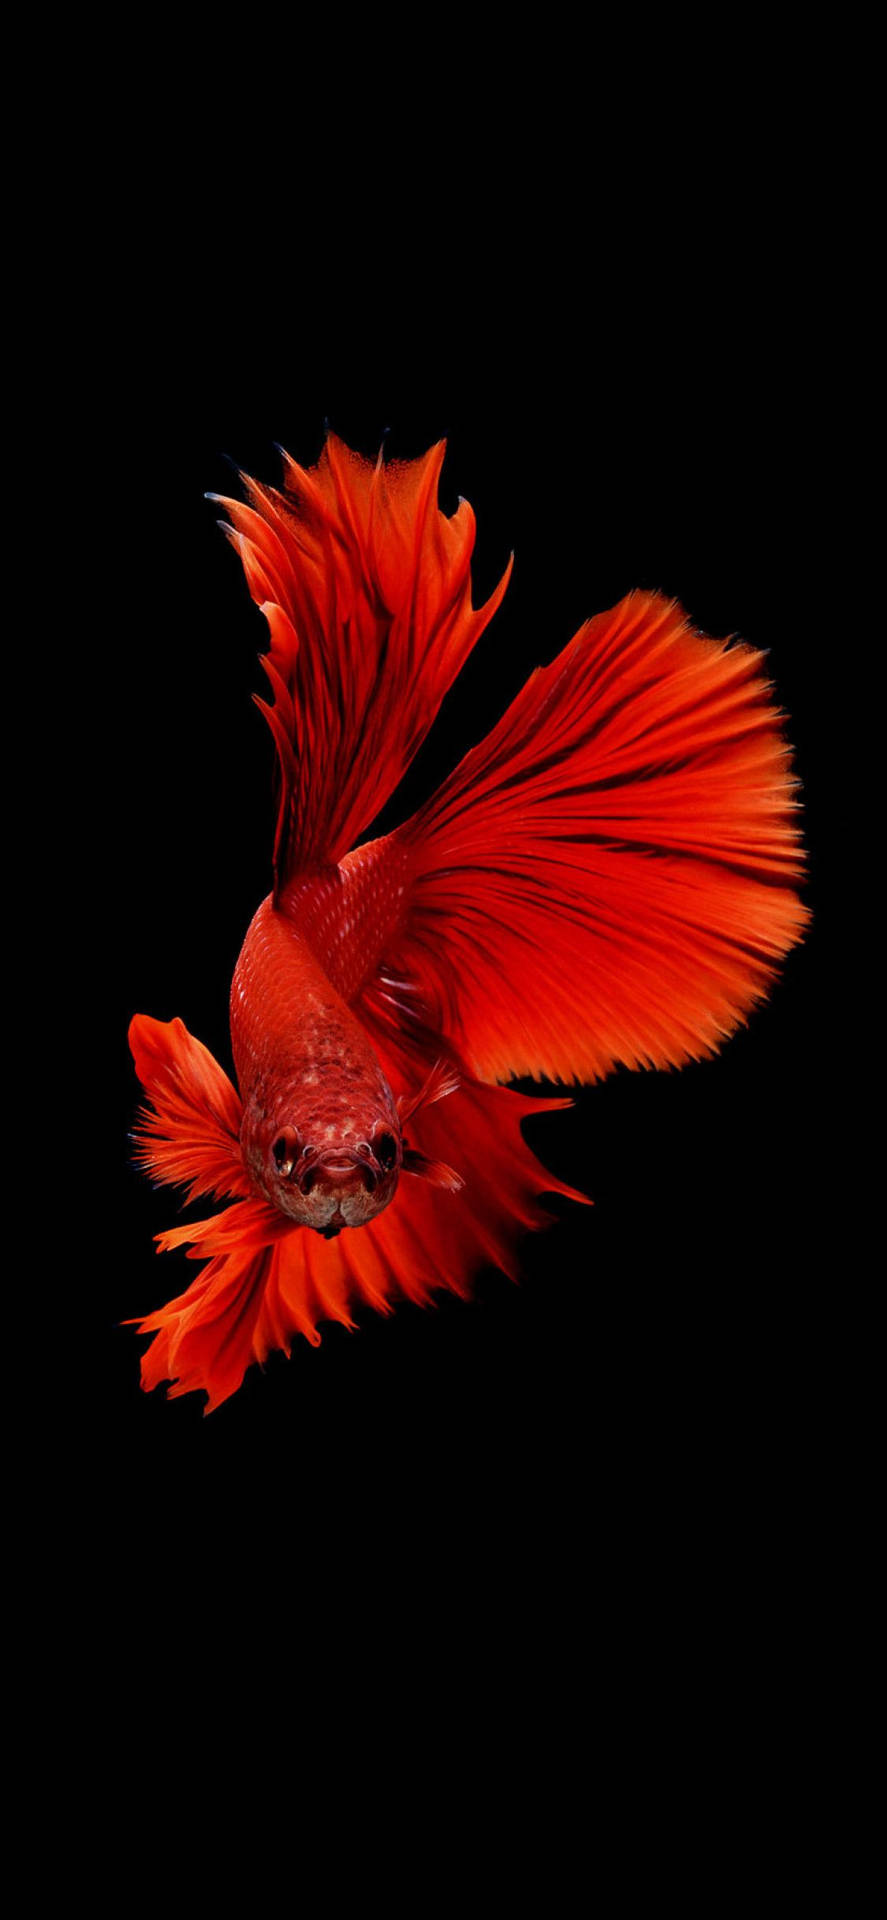 Red Siamese Fighting Fish on a Dark Background Wallpaper